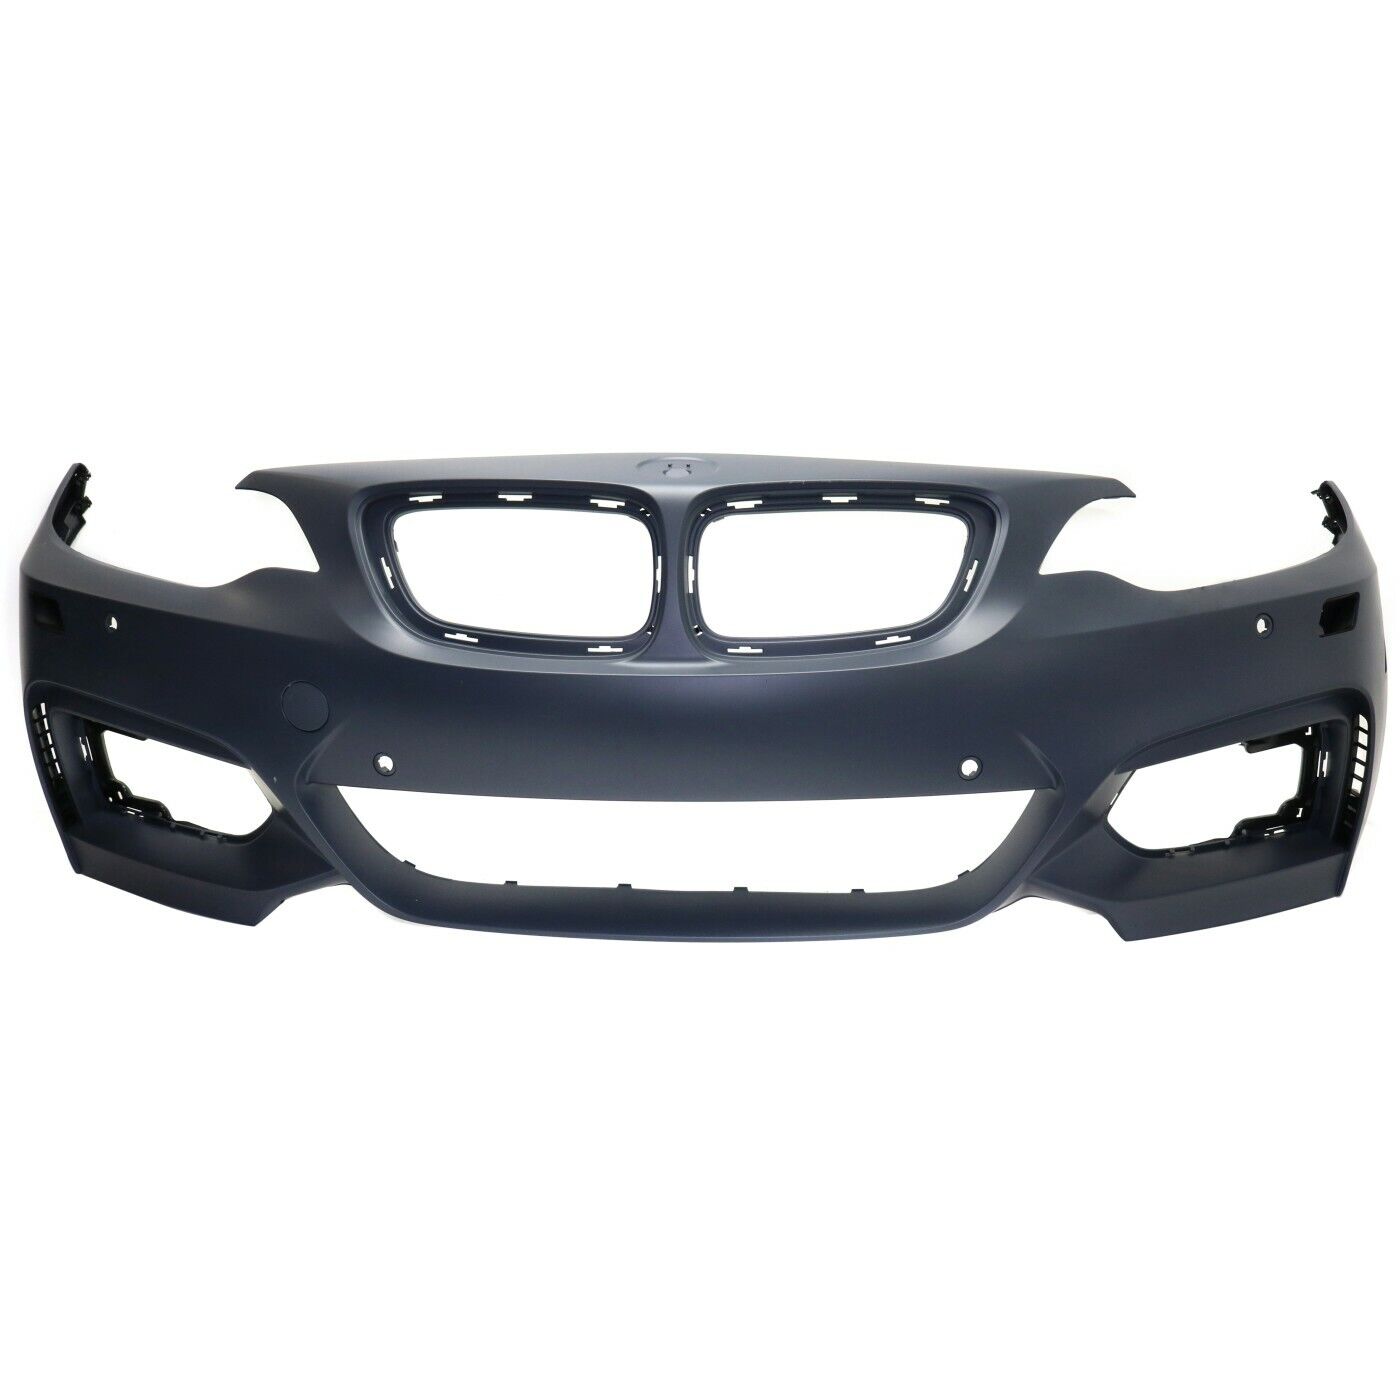 New Bumper Cover Facial Front Coupe for BMW 228i xDrive BM1000413 51118058097